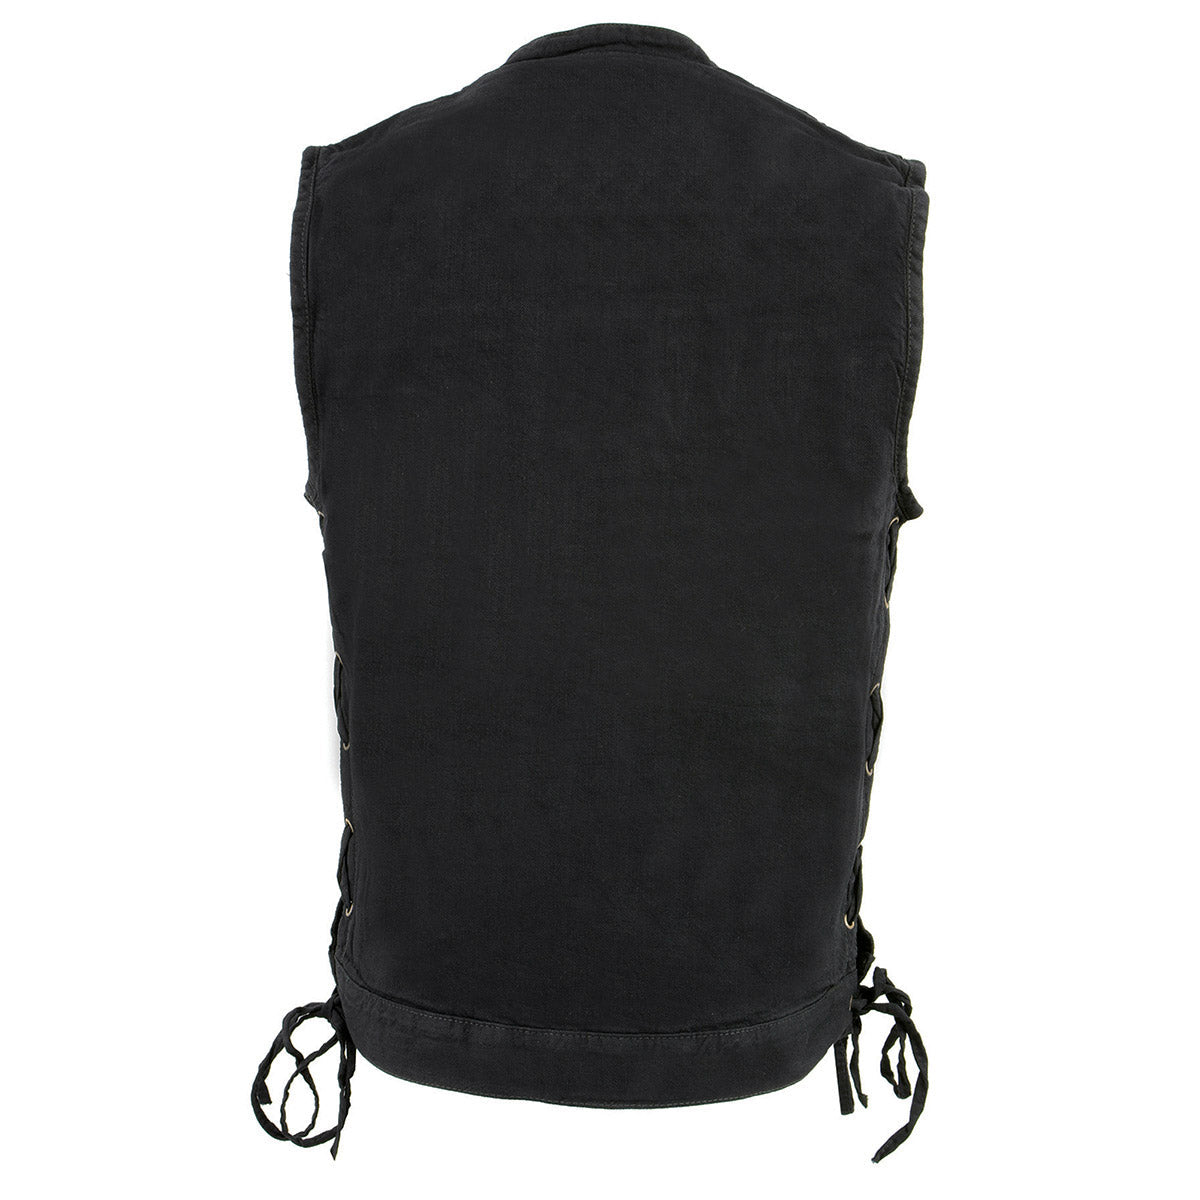 Milwaukee Leather MDM3002 Men's Black ‘Covert’ Side Lace Denim Club Style Vest with Dual Closure